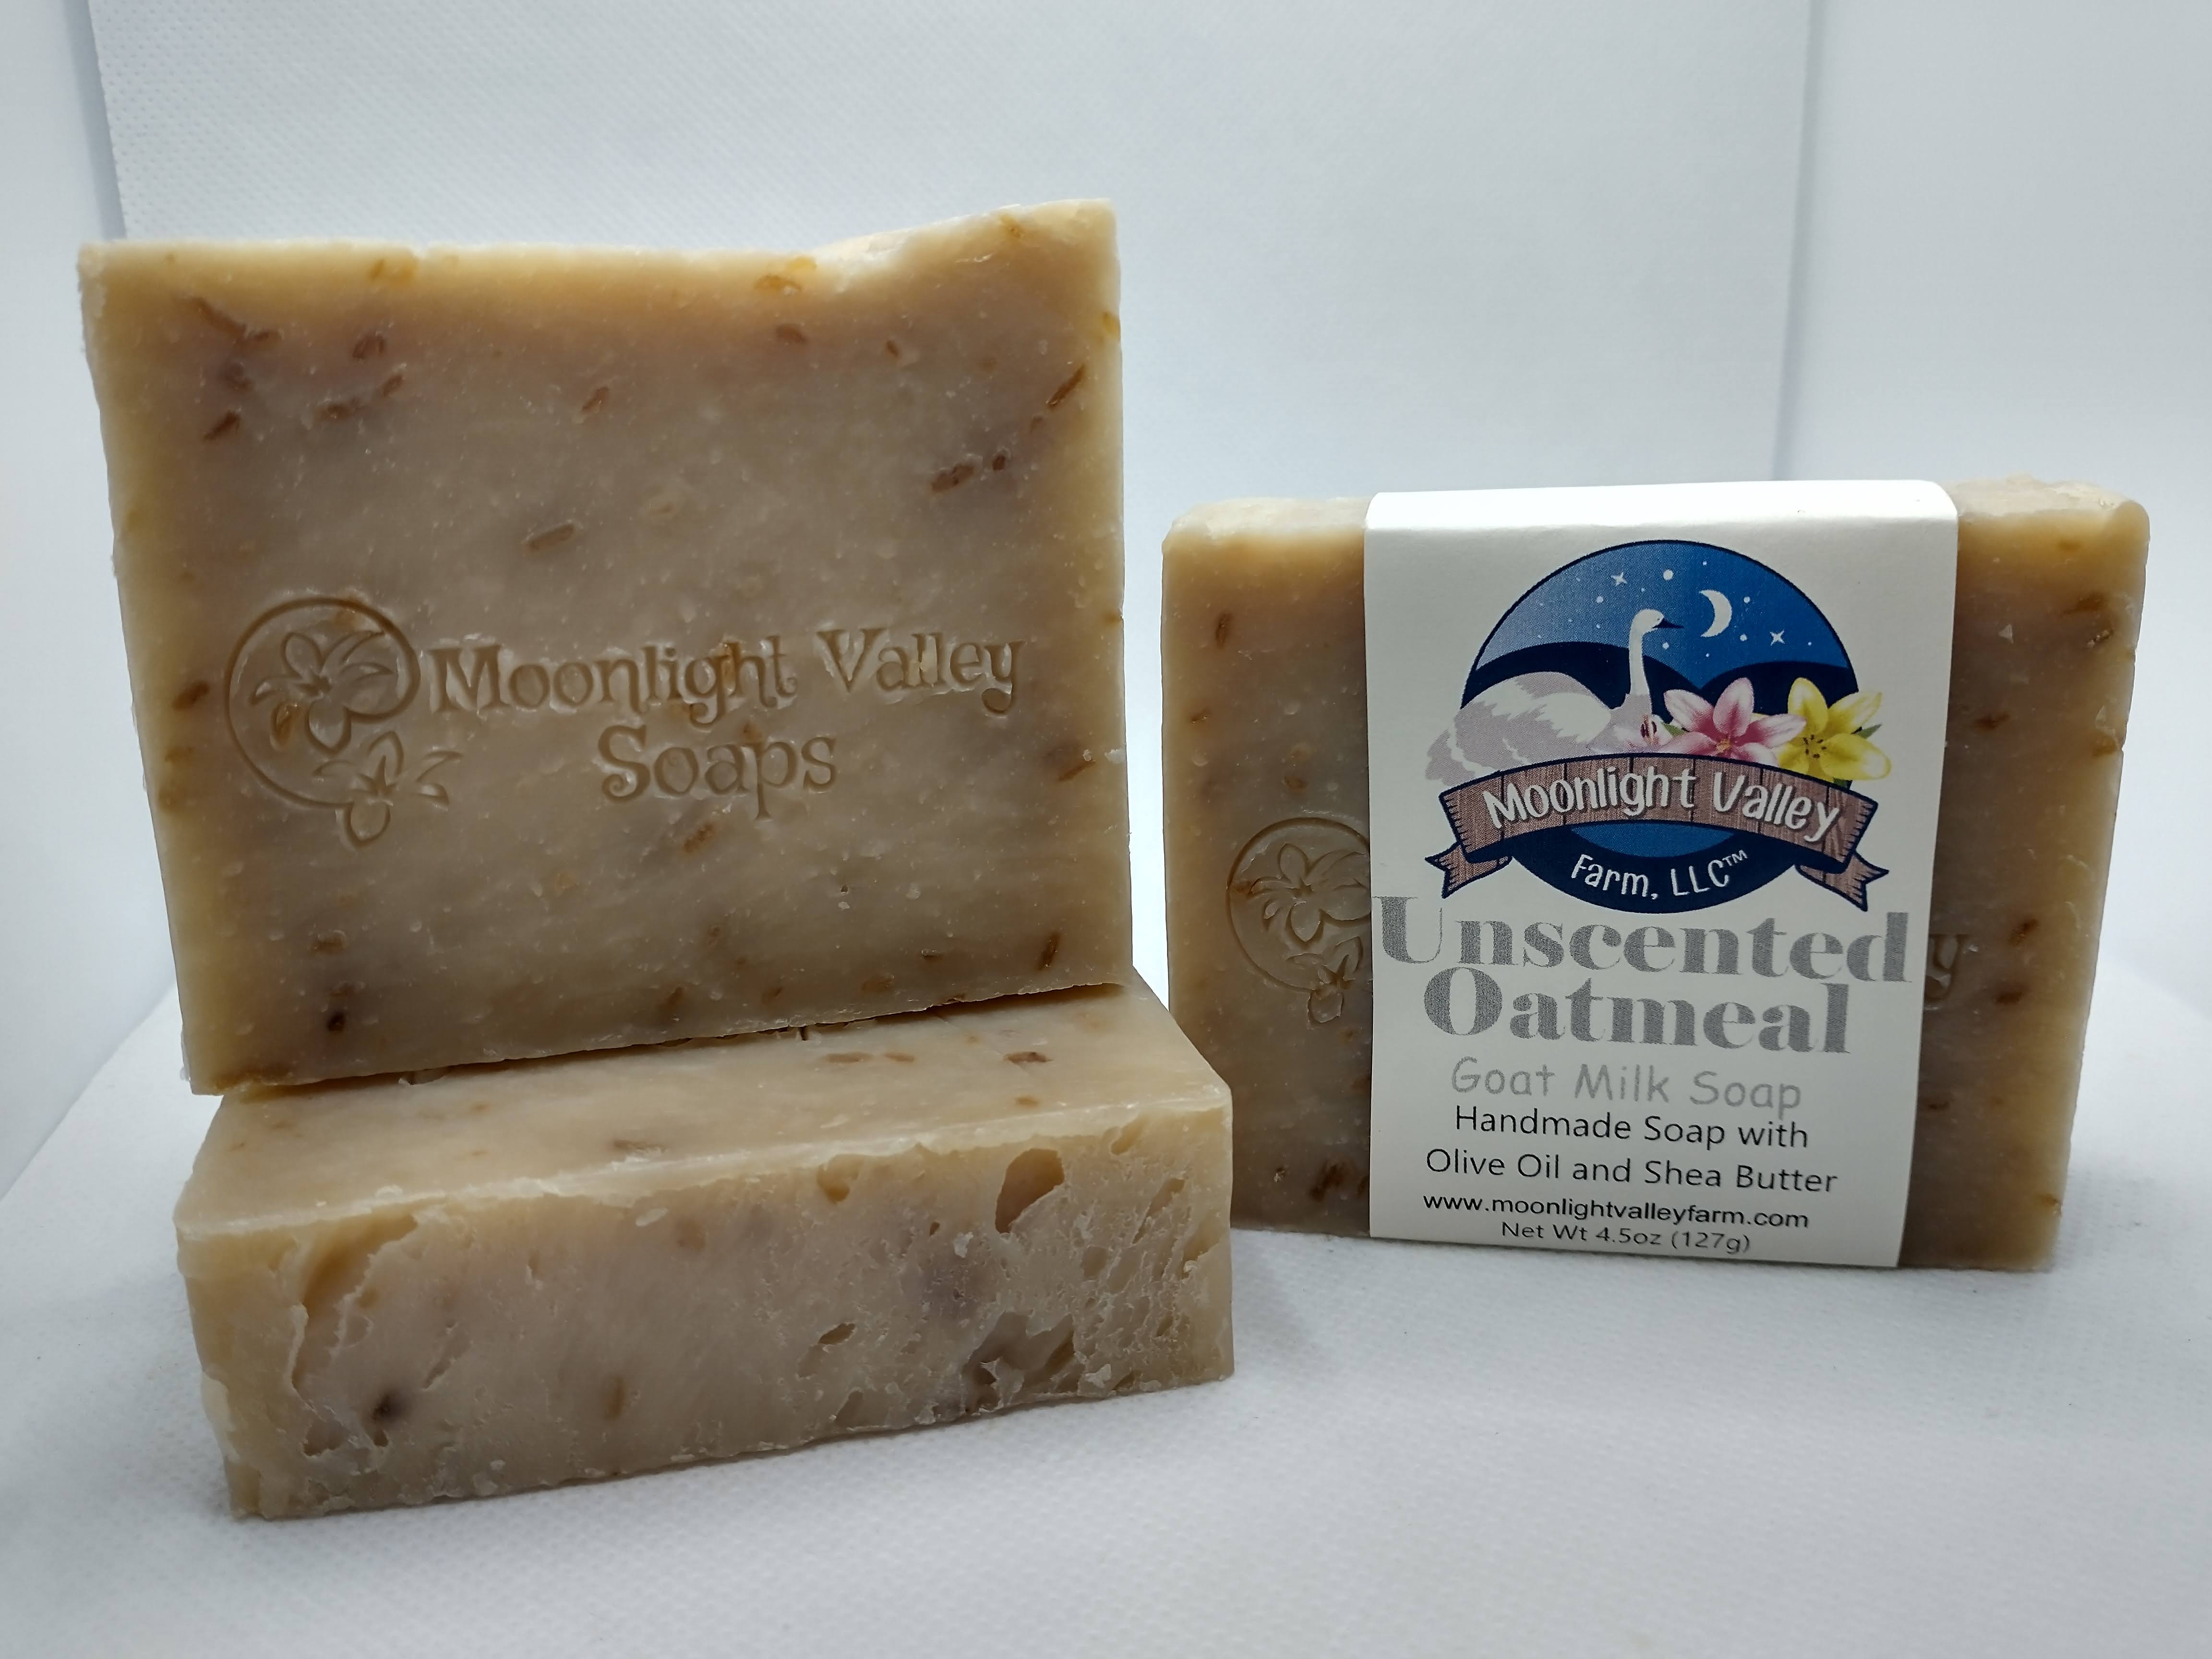 Unscented Oatmeal Goat's Milk Soap